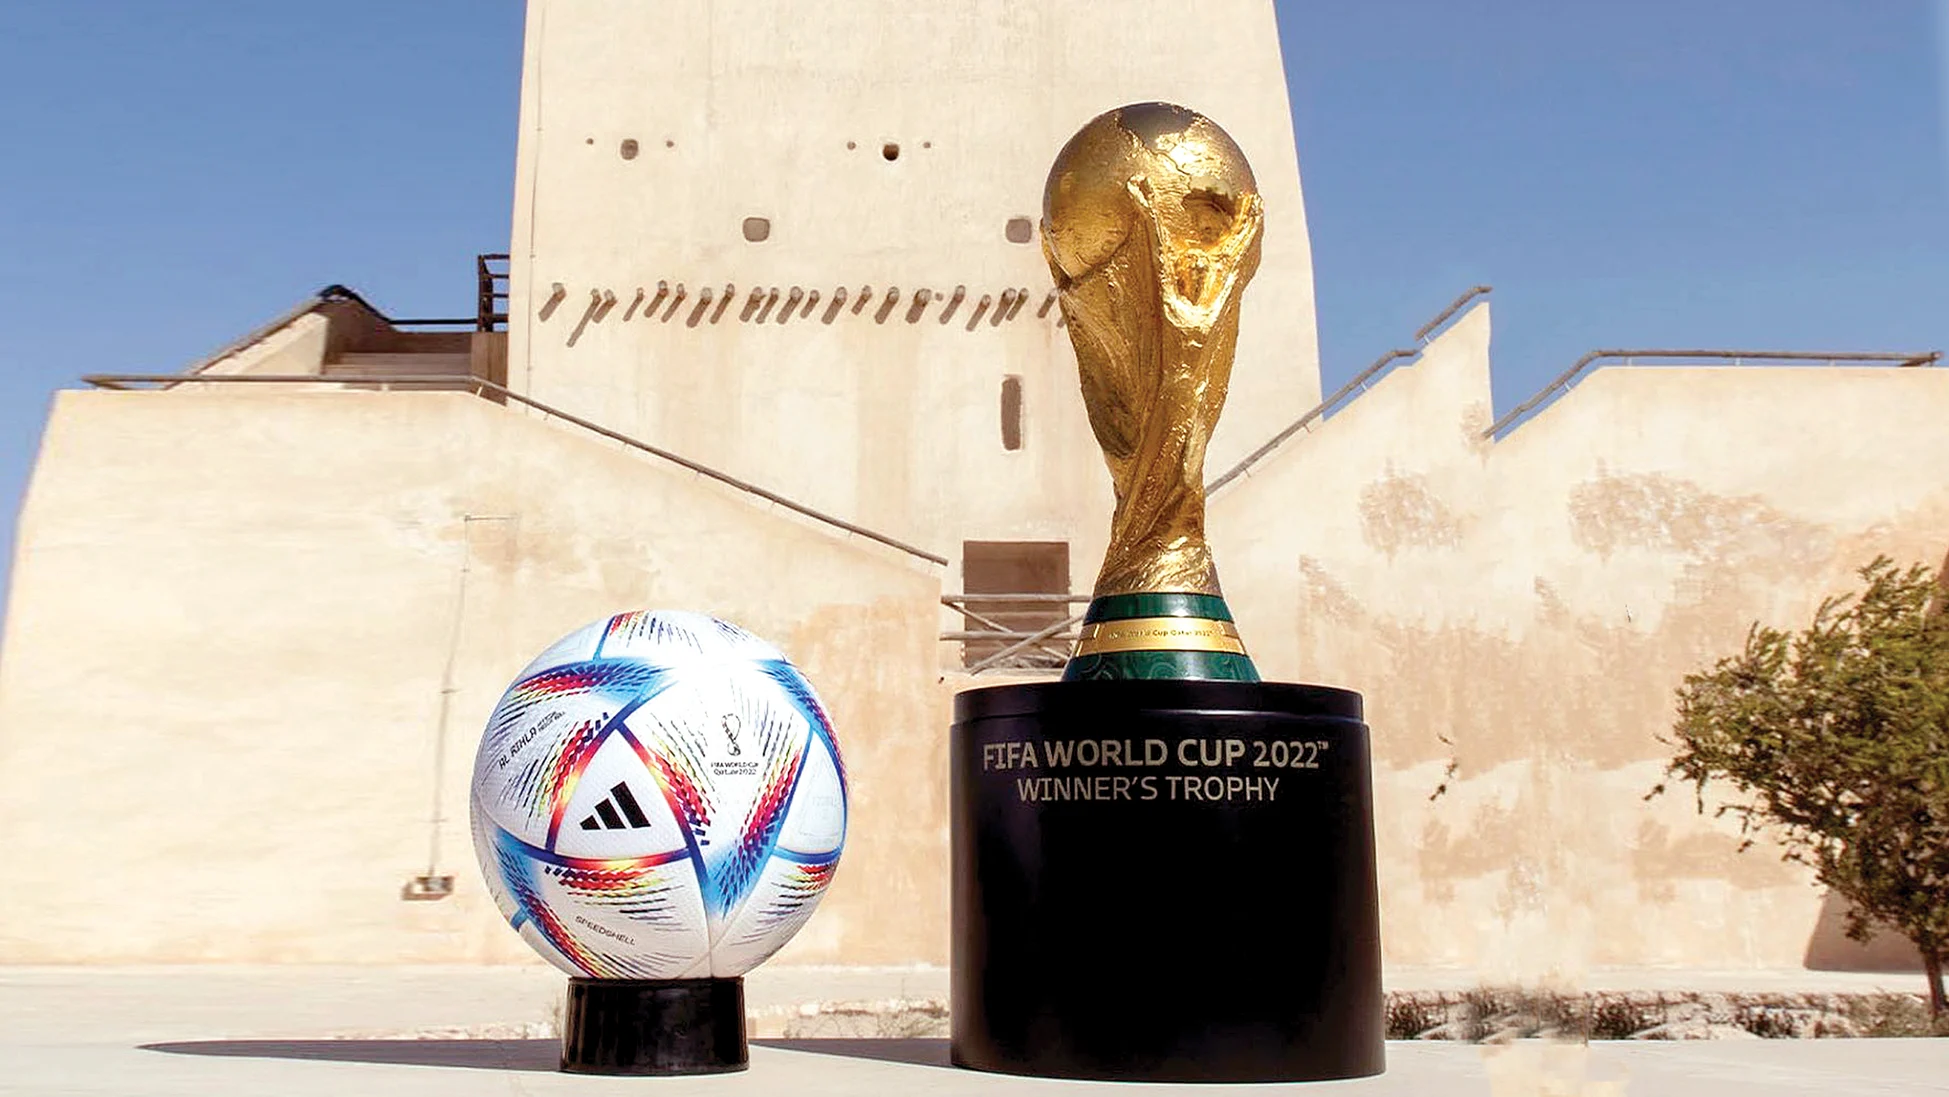 Qatar Dazzles the World with First Carbon-Neutral World Cup